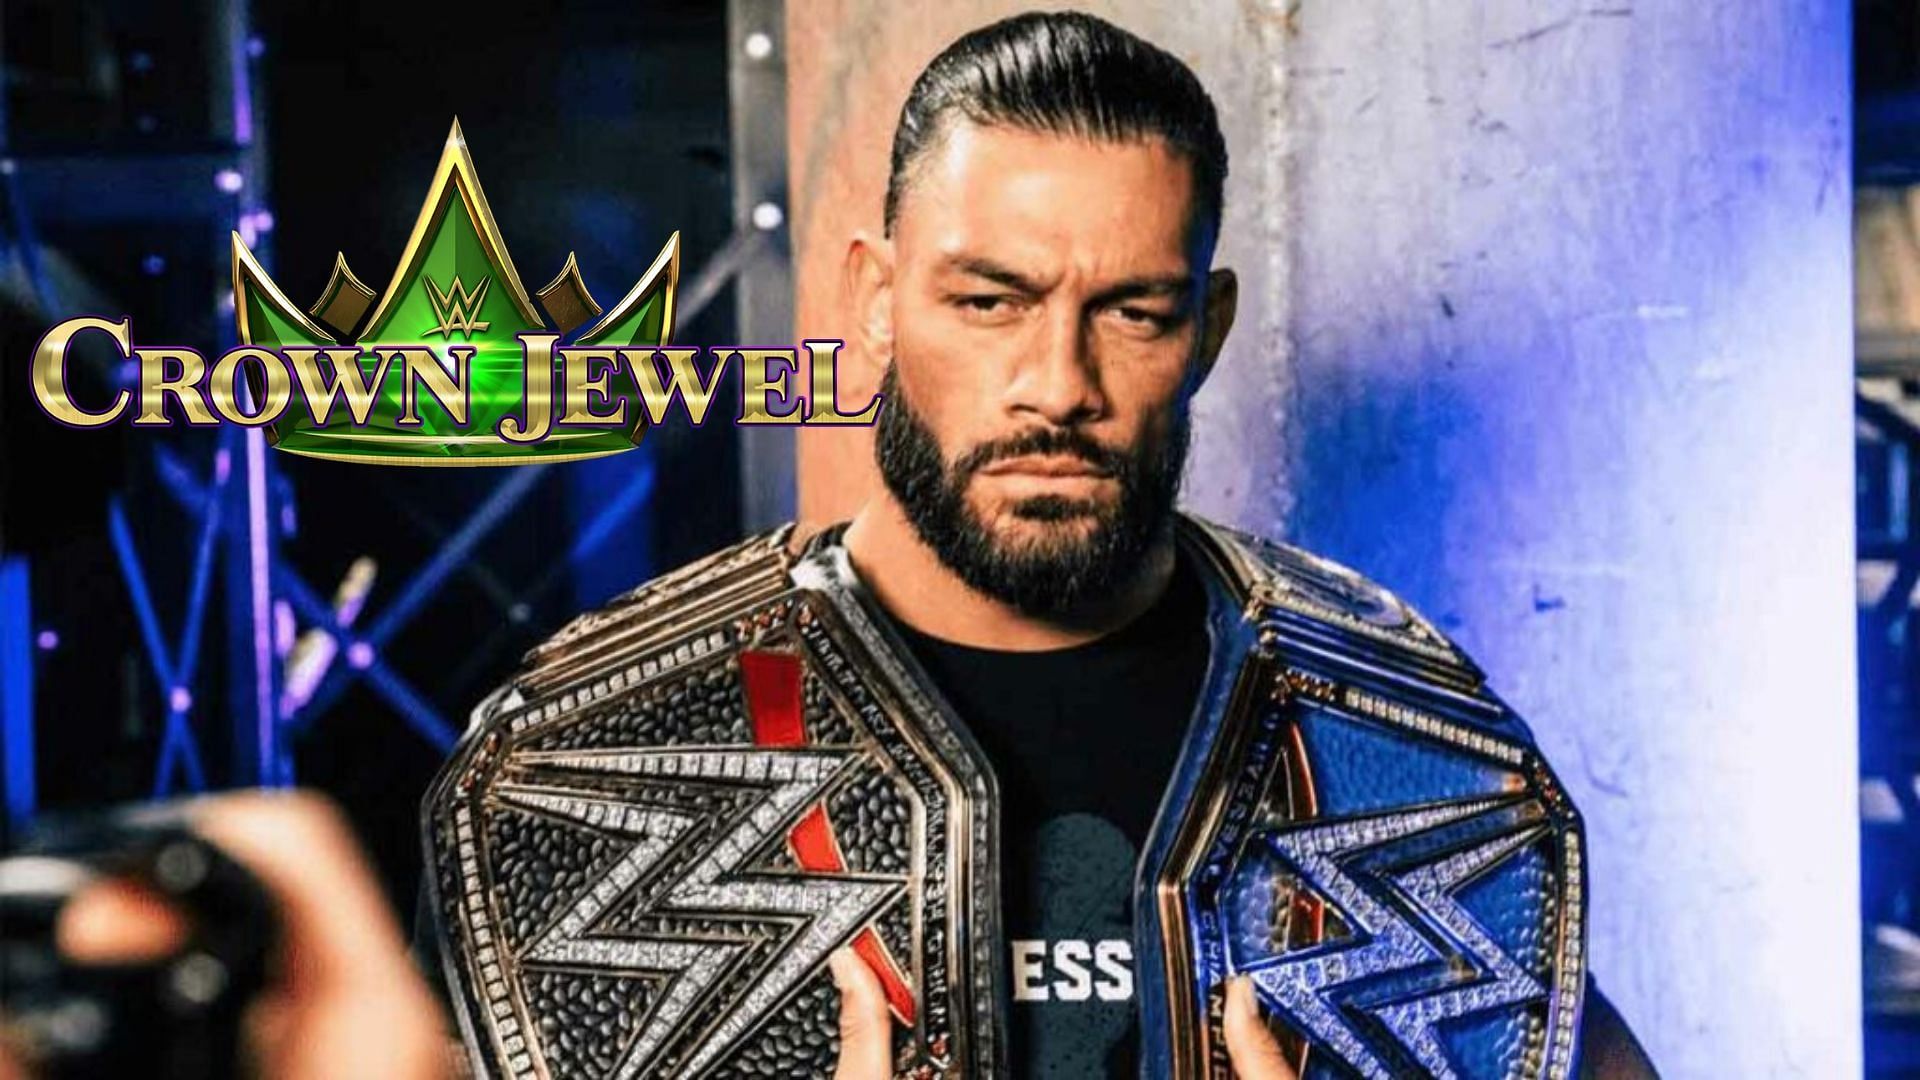 Roman Reigns losing the Undisputed WWE title at Crown Jewel "would be the worst thing", says Hall of Famer